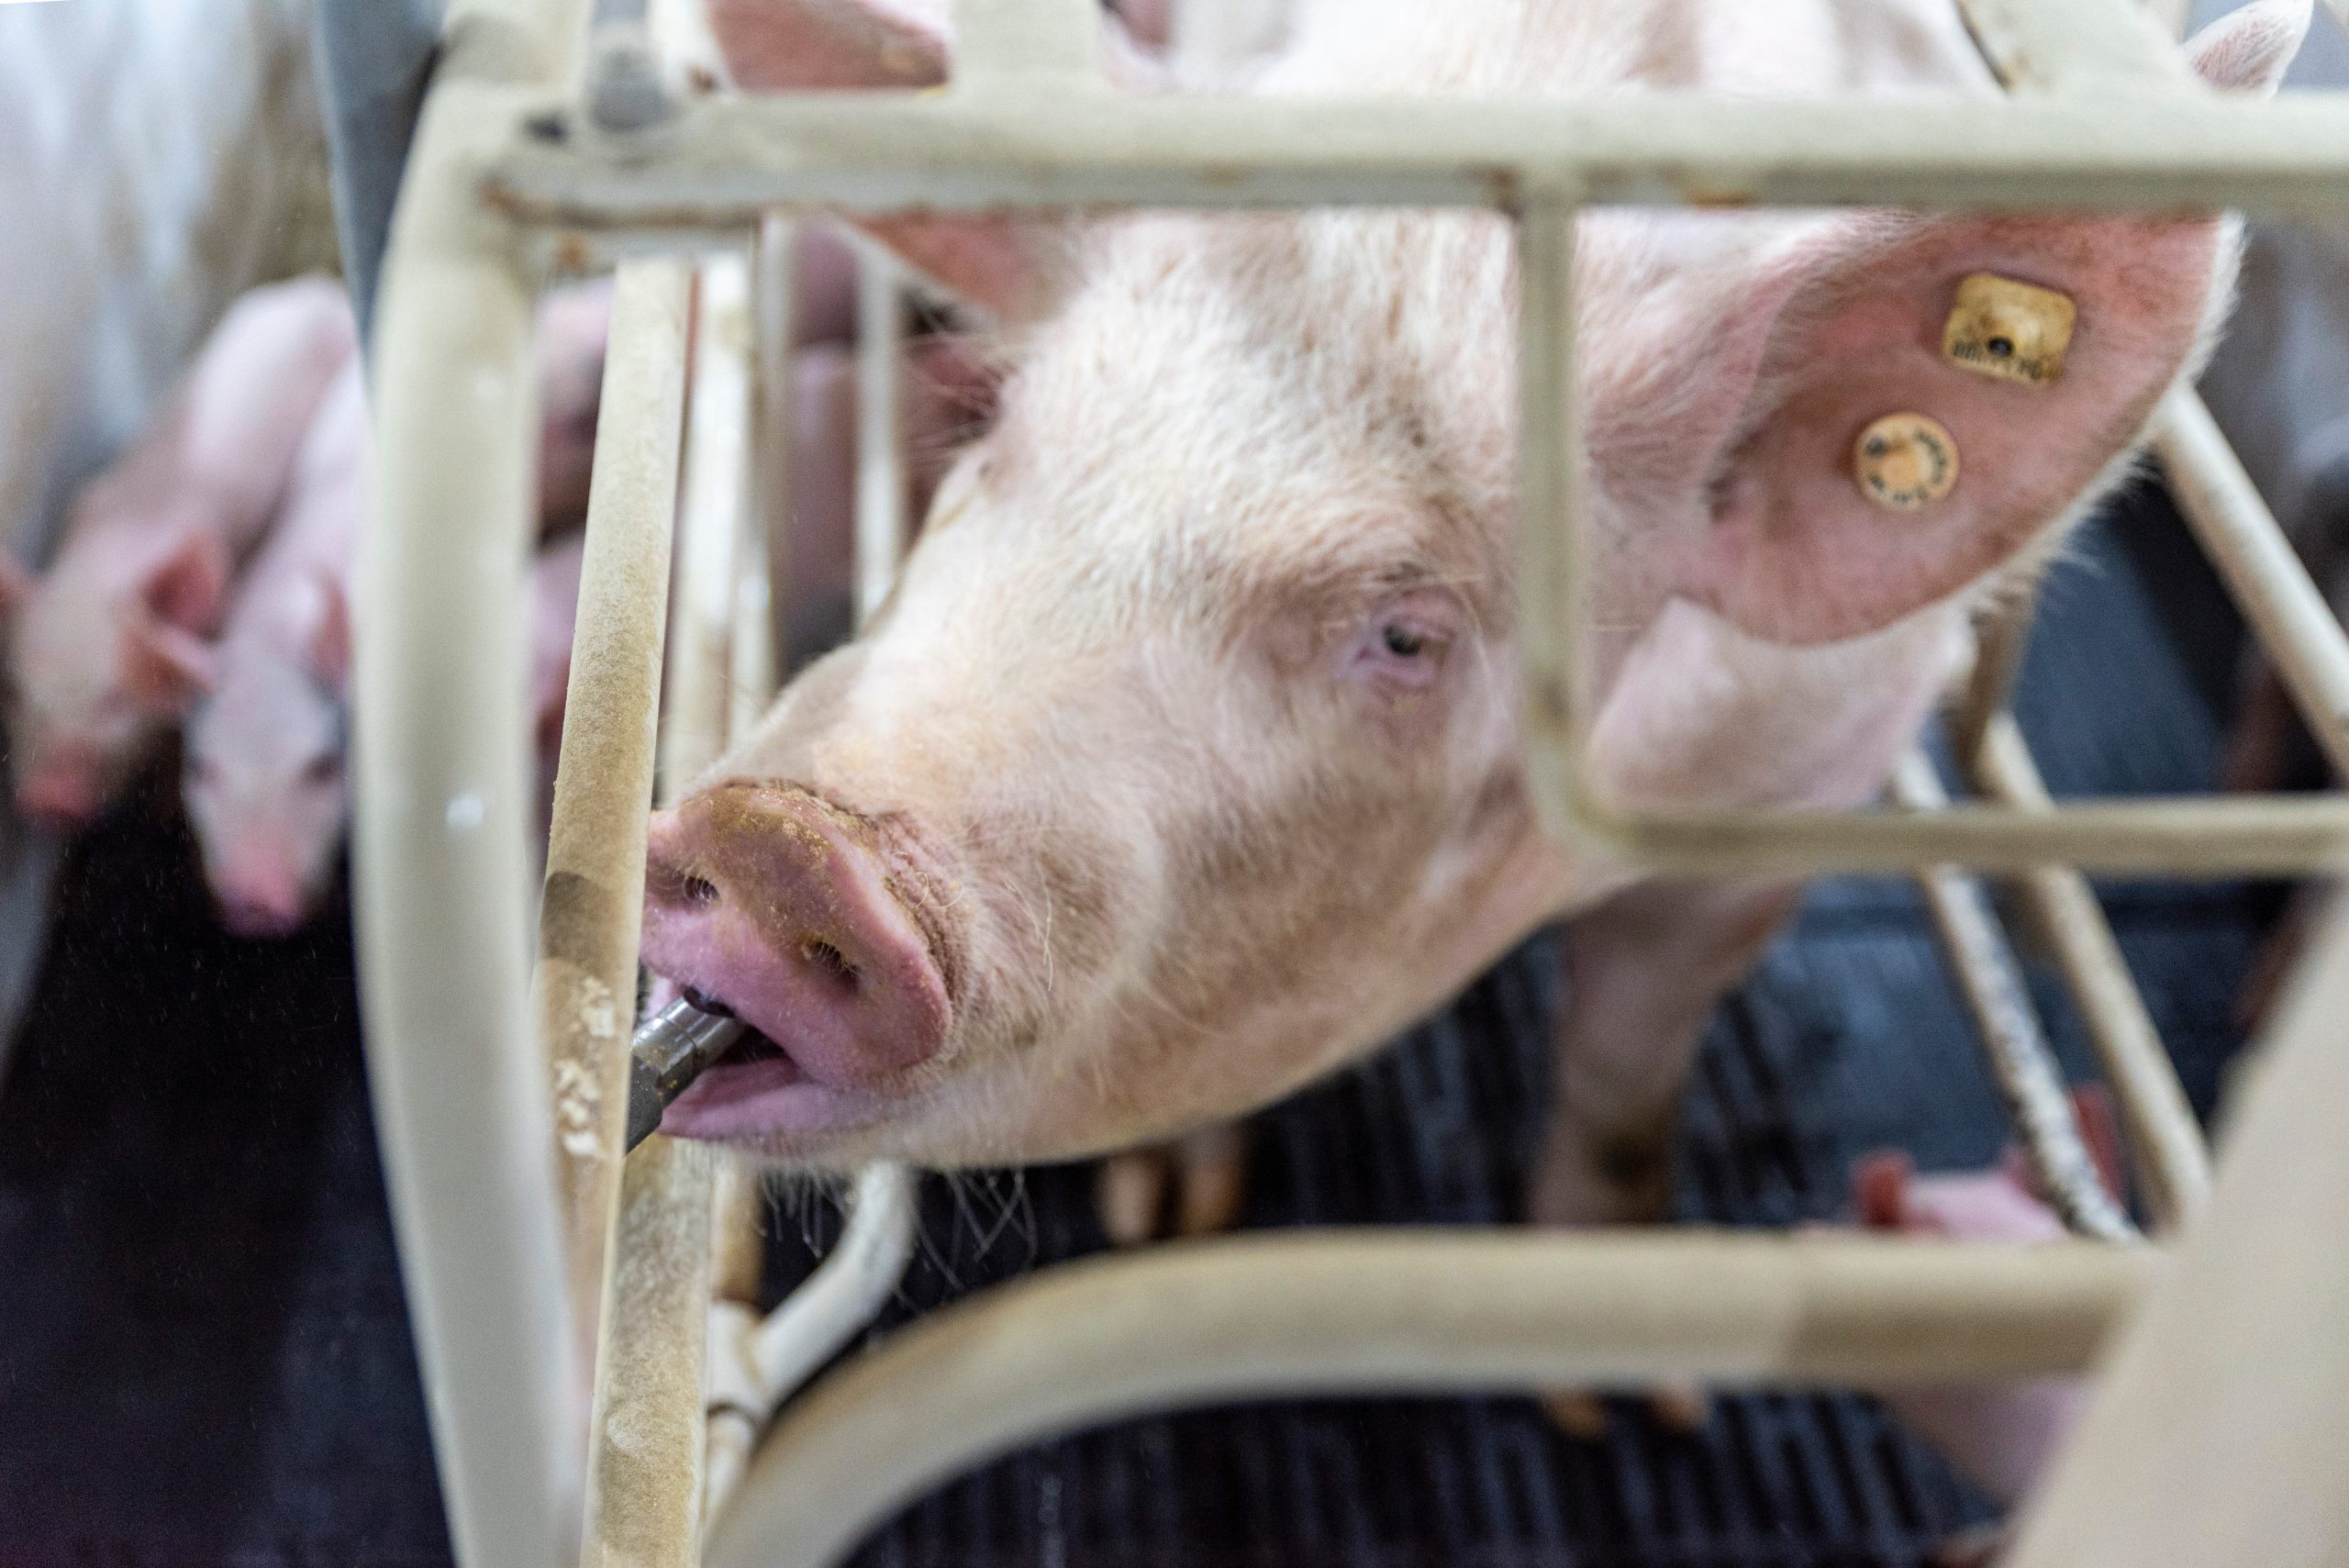 Pigs can get efficient relief by receiving medication through their normal trip to the waterer. (Photo courtesy of Pharmgate Animal Health.)